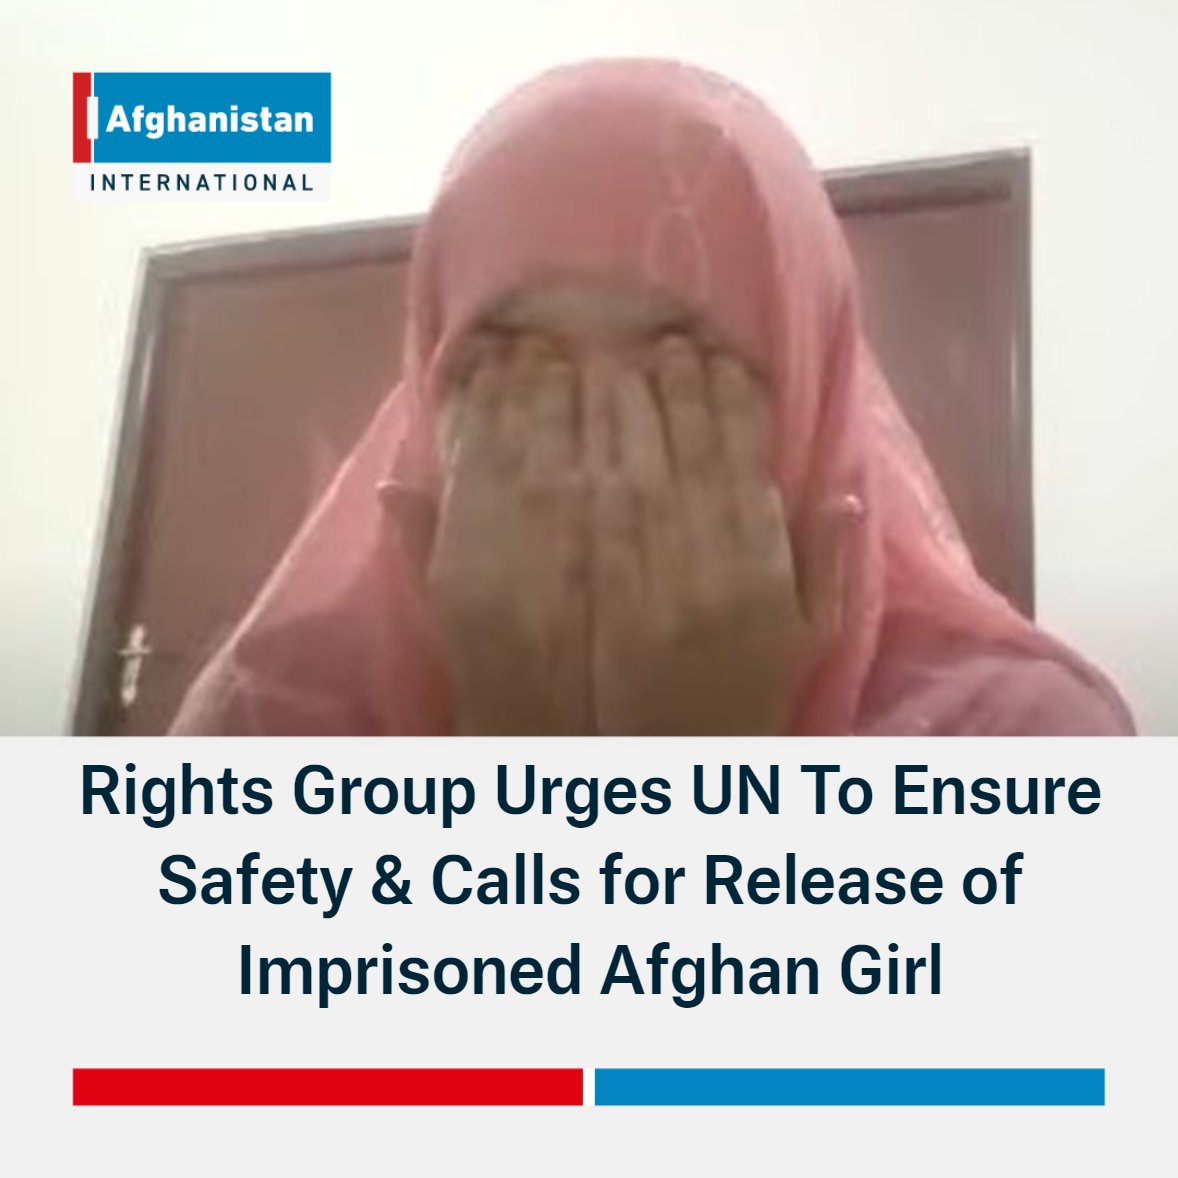 Afghanistan Independent Human Rights Commission (AIHRC) has urged the United Nations to ensure the safety and called for the release of the Afghan girl Elaha Delawarzai. AIHRC described Taliban's behaviour towards Delawarzai as 'inhumane'.